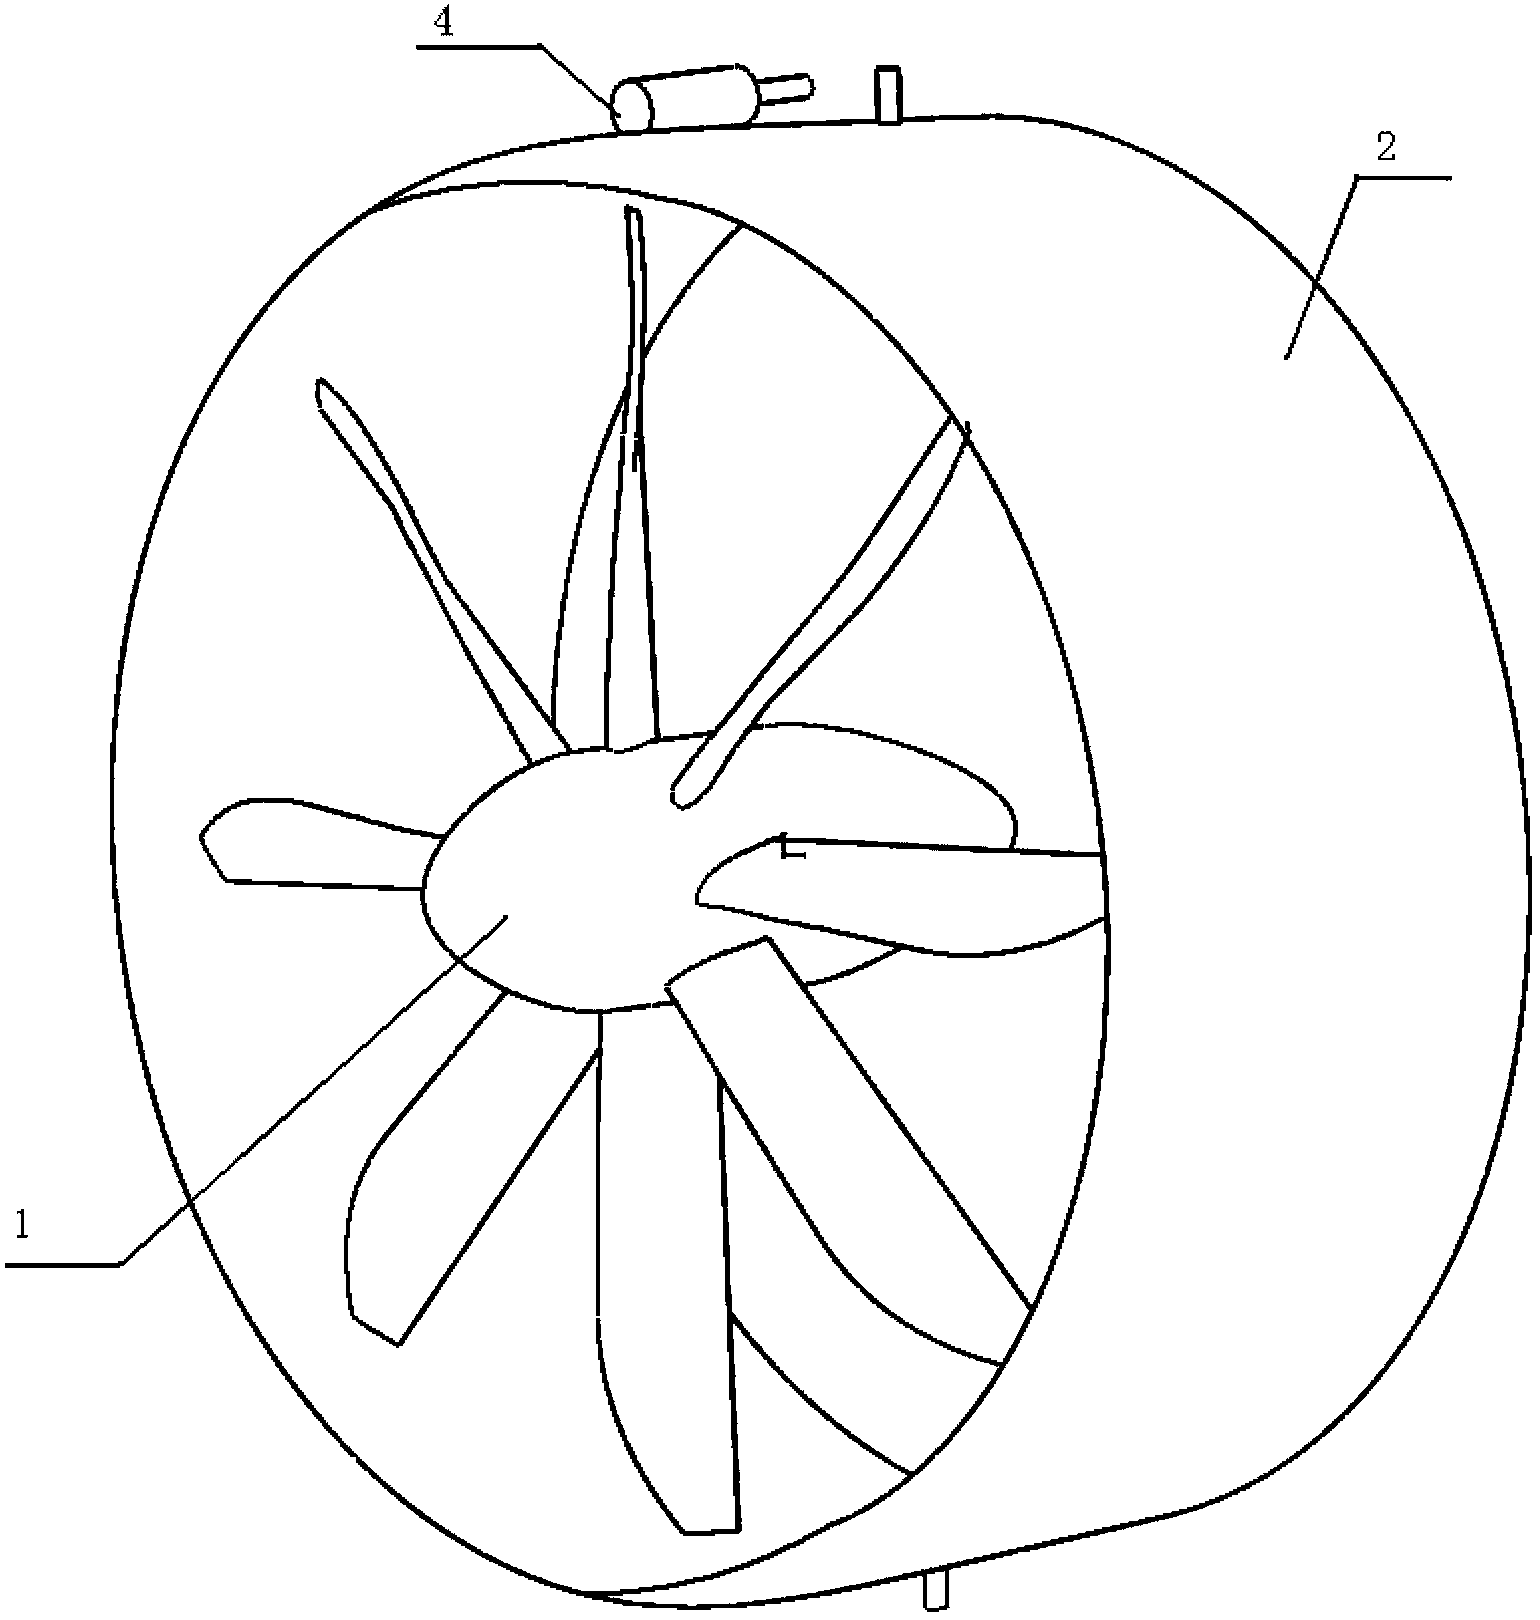 Thrust device capable of balancing reactive torque